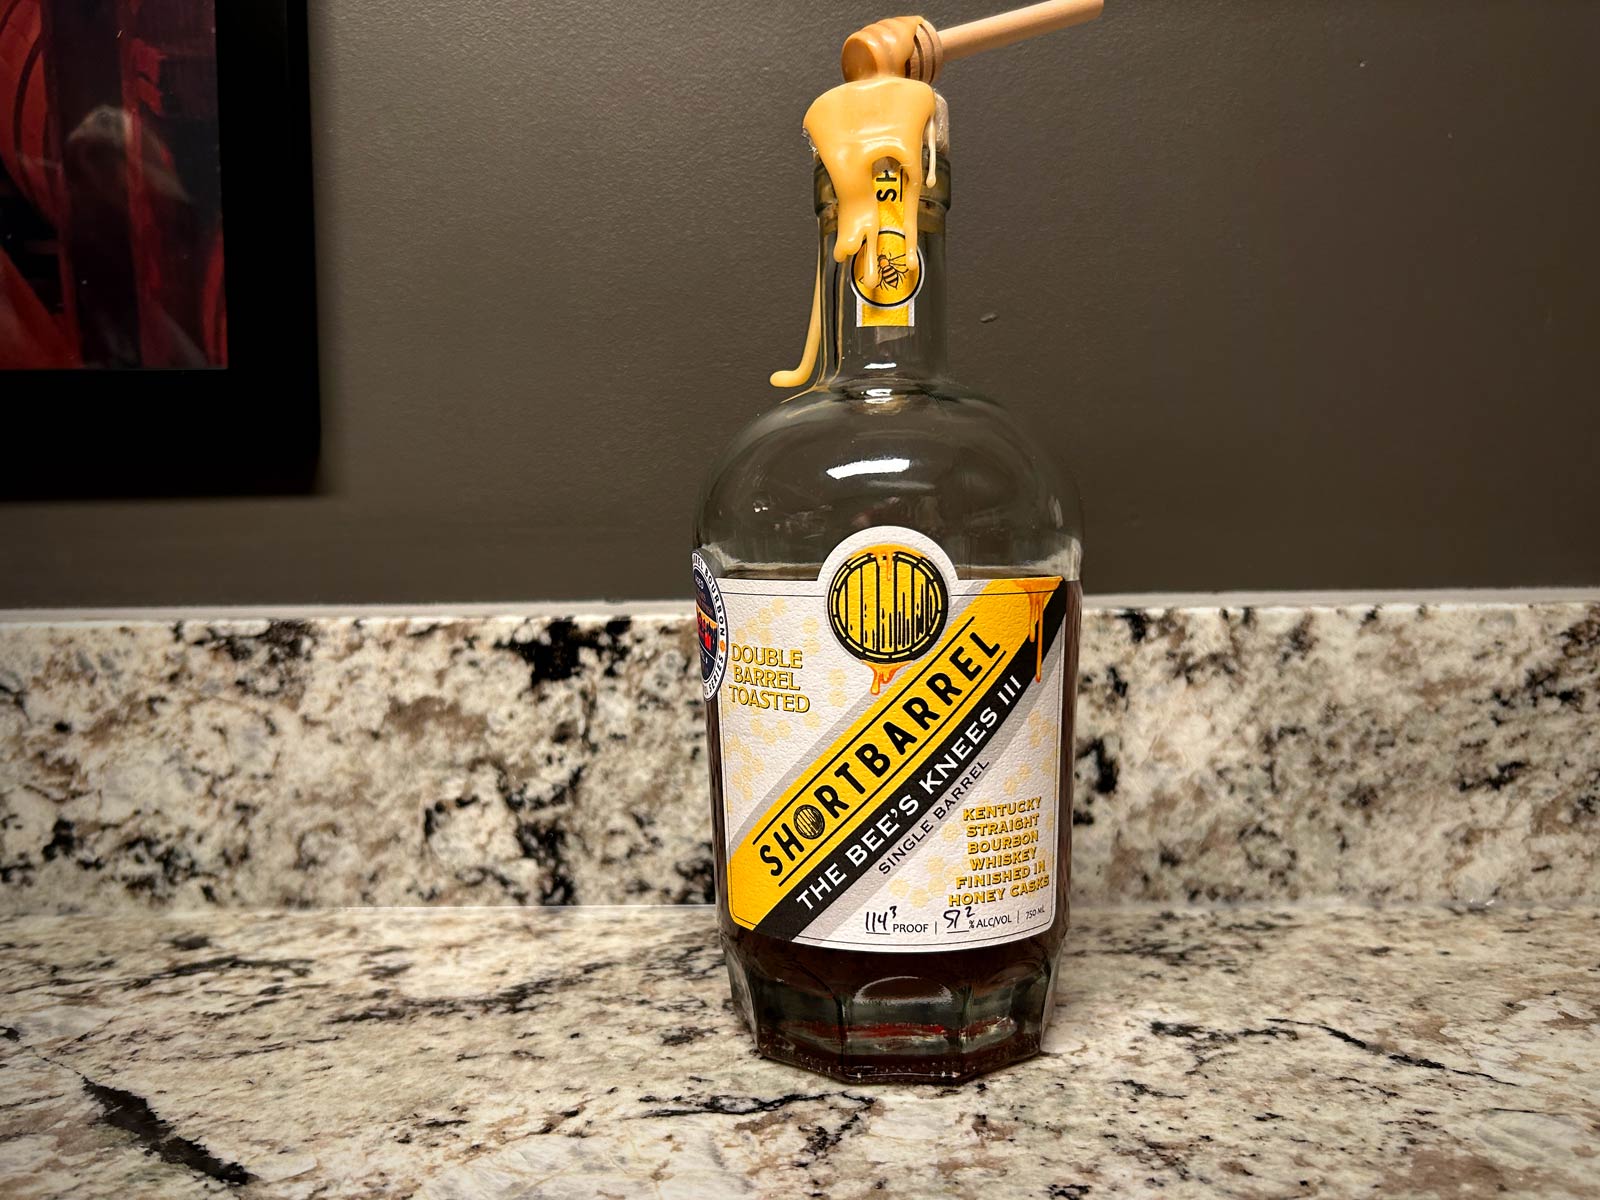 Short Barrel The Bees Knees III Kentucky Straight Bourbon Whiskey Finished in Honey
